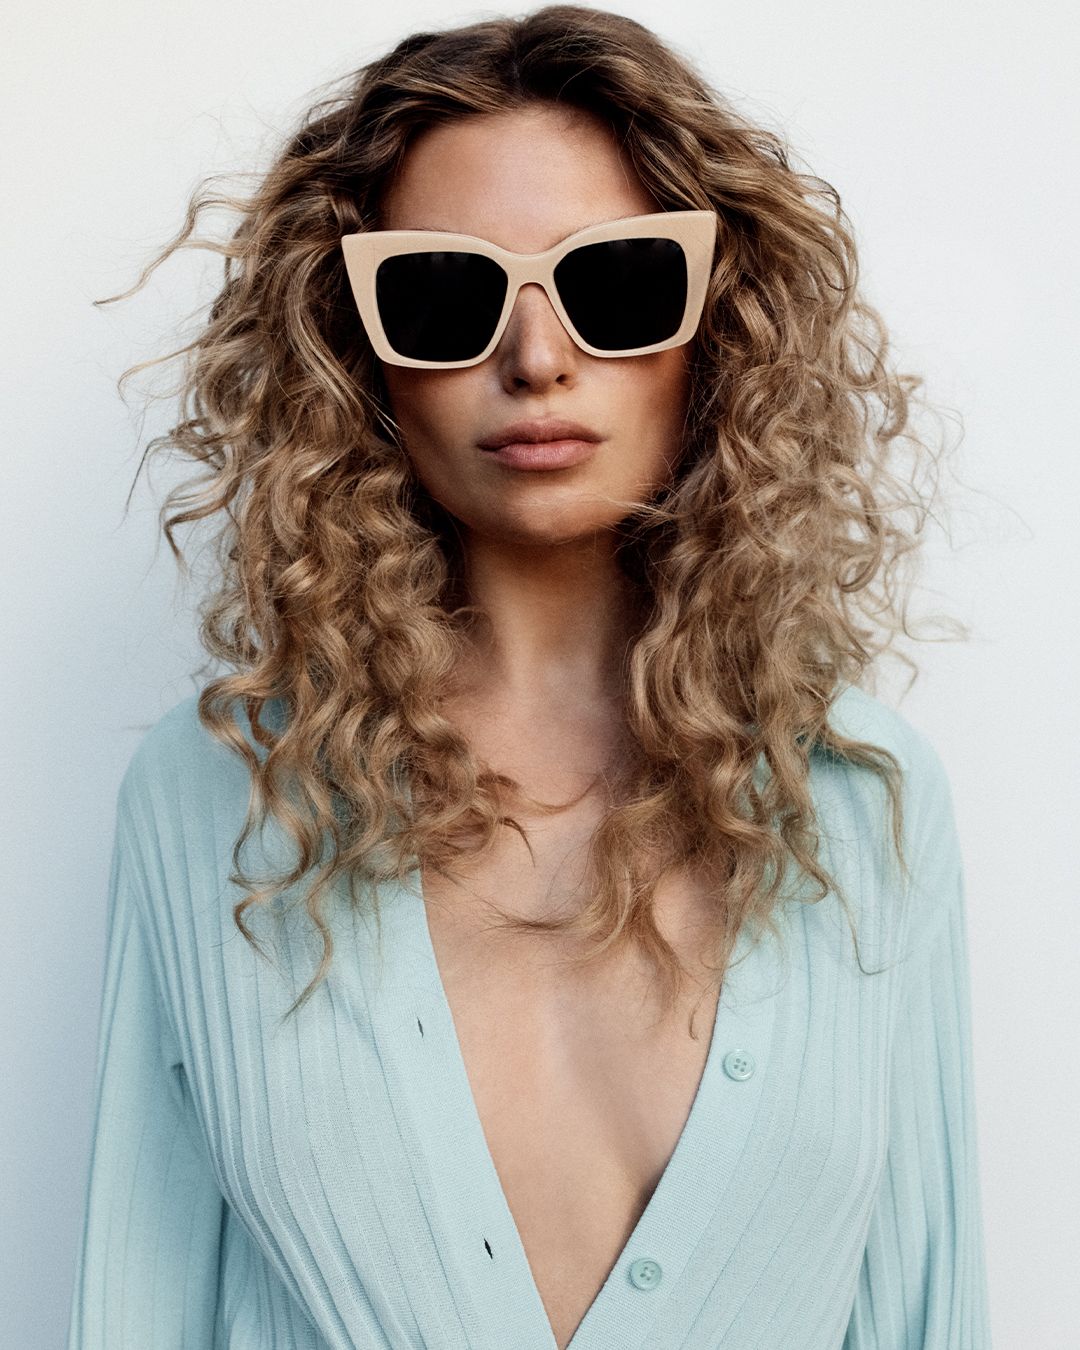 Model facing the camera wearing light beige oversized sunglasses and a light blue knitted top